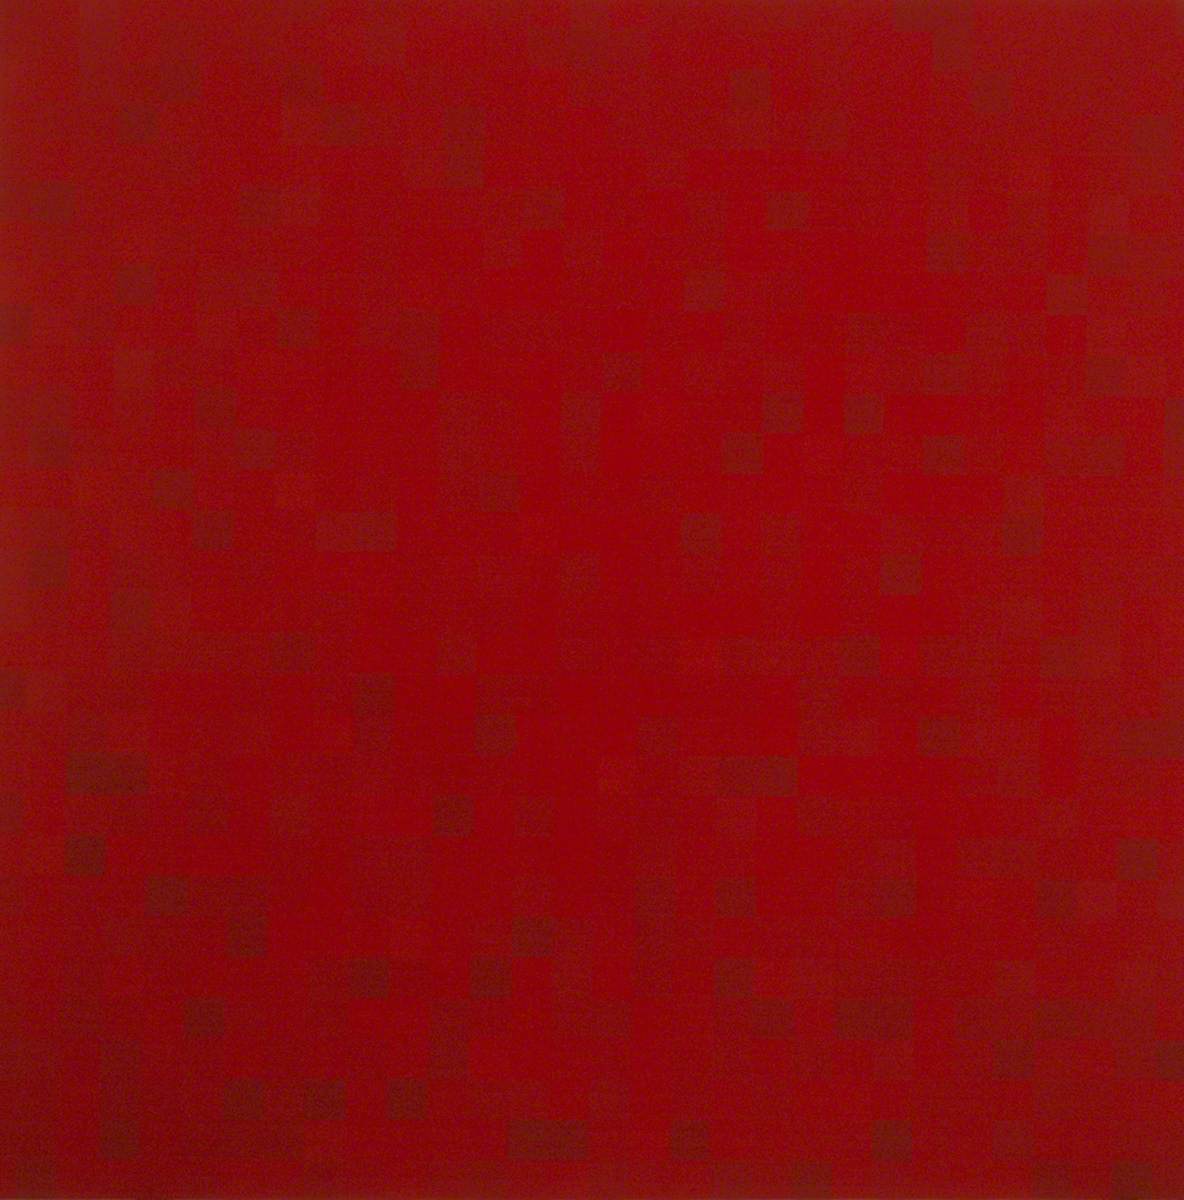 Untitled Red Painting